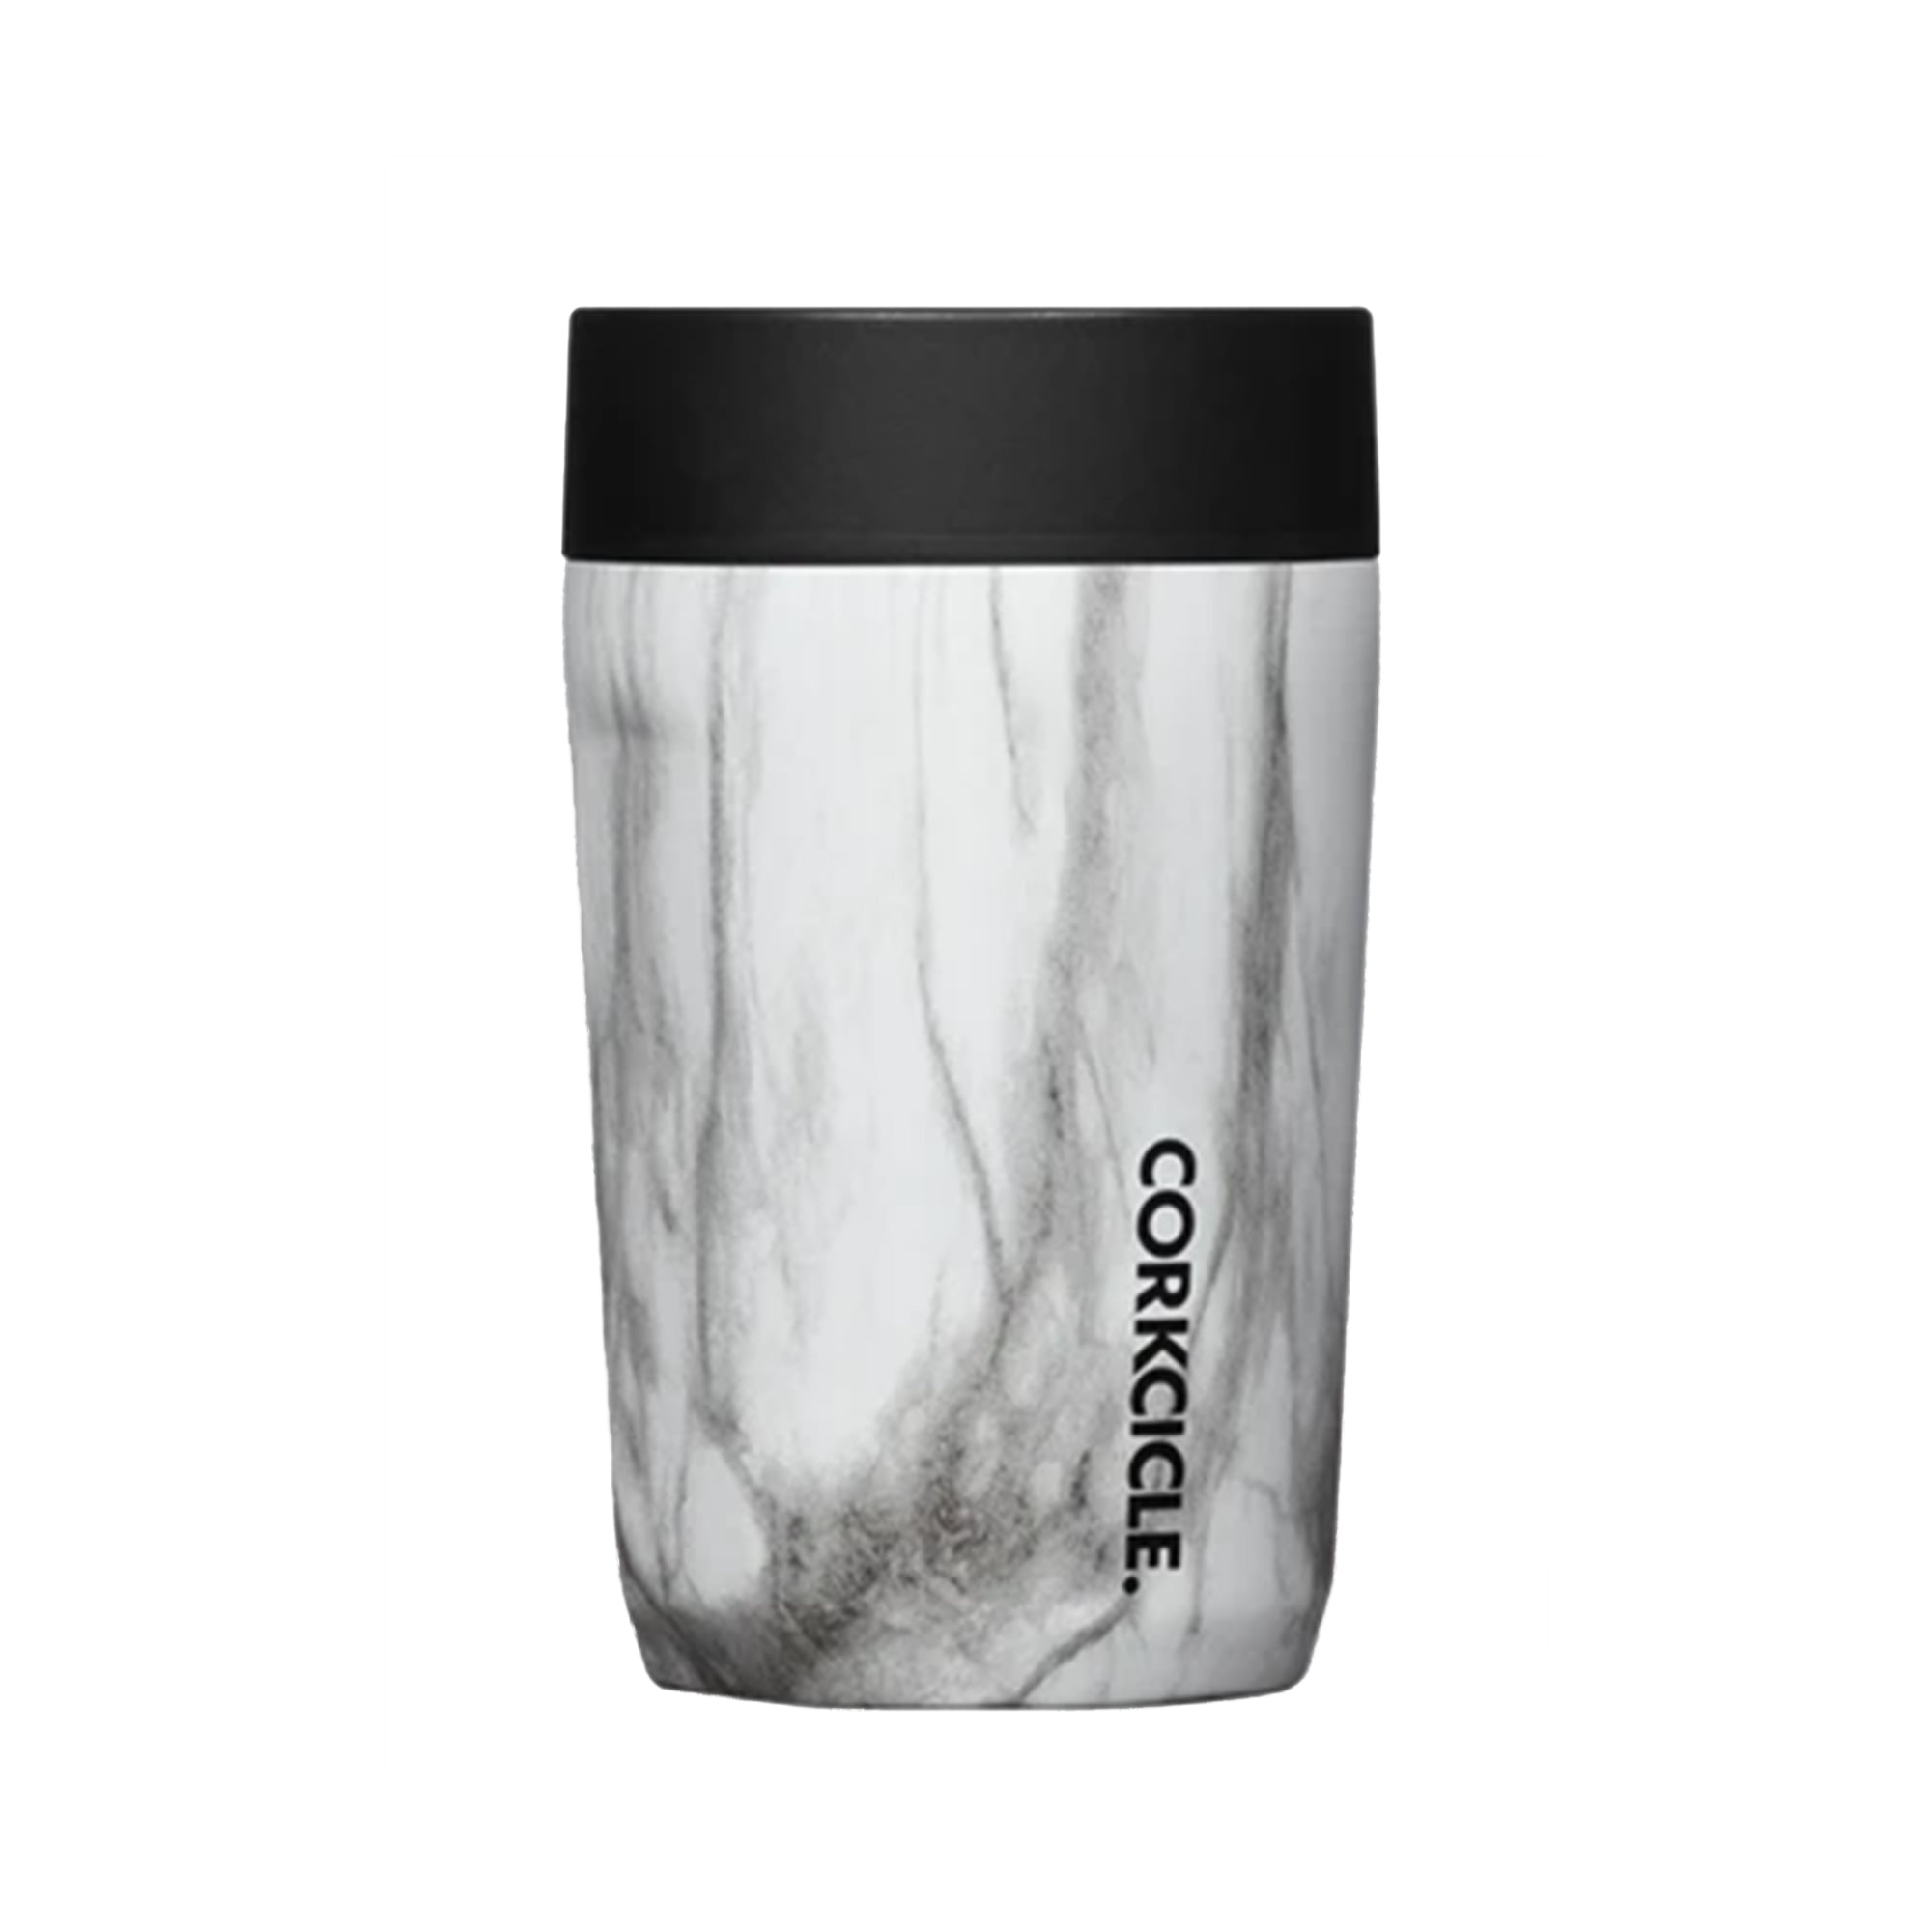 Corkcircle® Commuter Cup Insulated Travel Mug